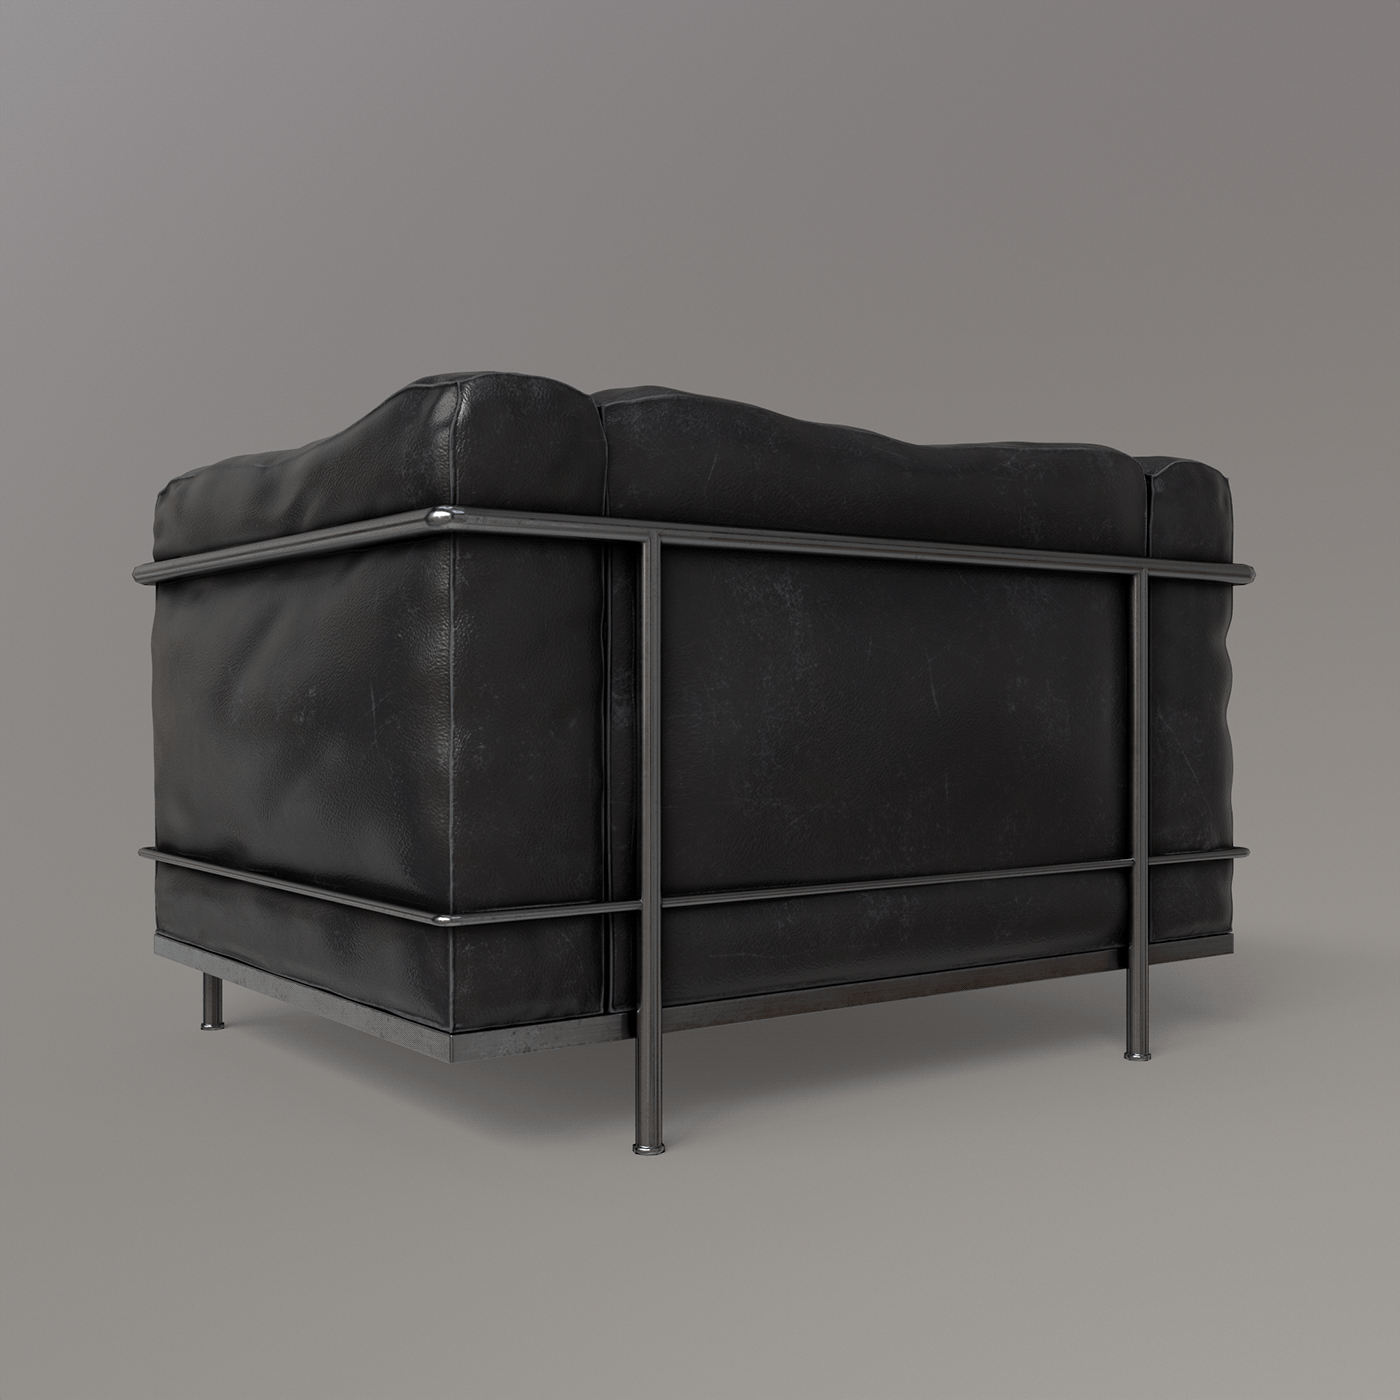 Cassina LC3 3ds max furniture modeling Substance Painter Zbrush